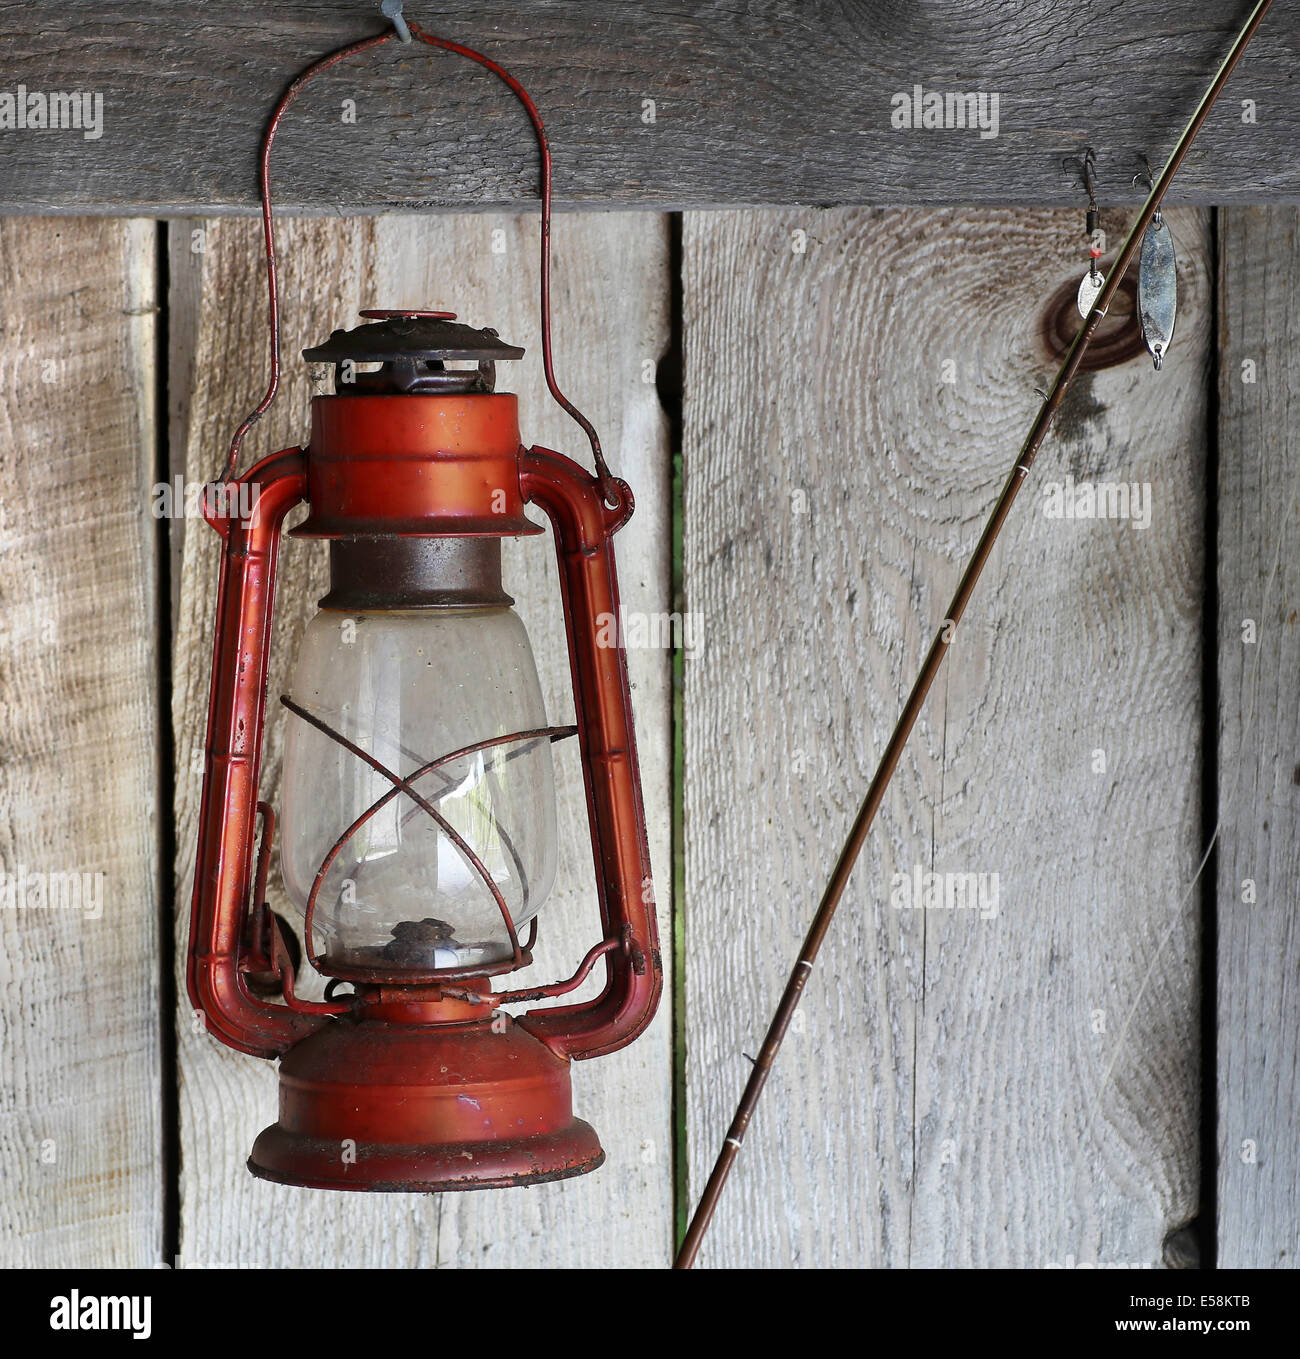 Red lantern hanging on rough wood cabin wall with fishing rod and hook nearby Stock Photo